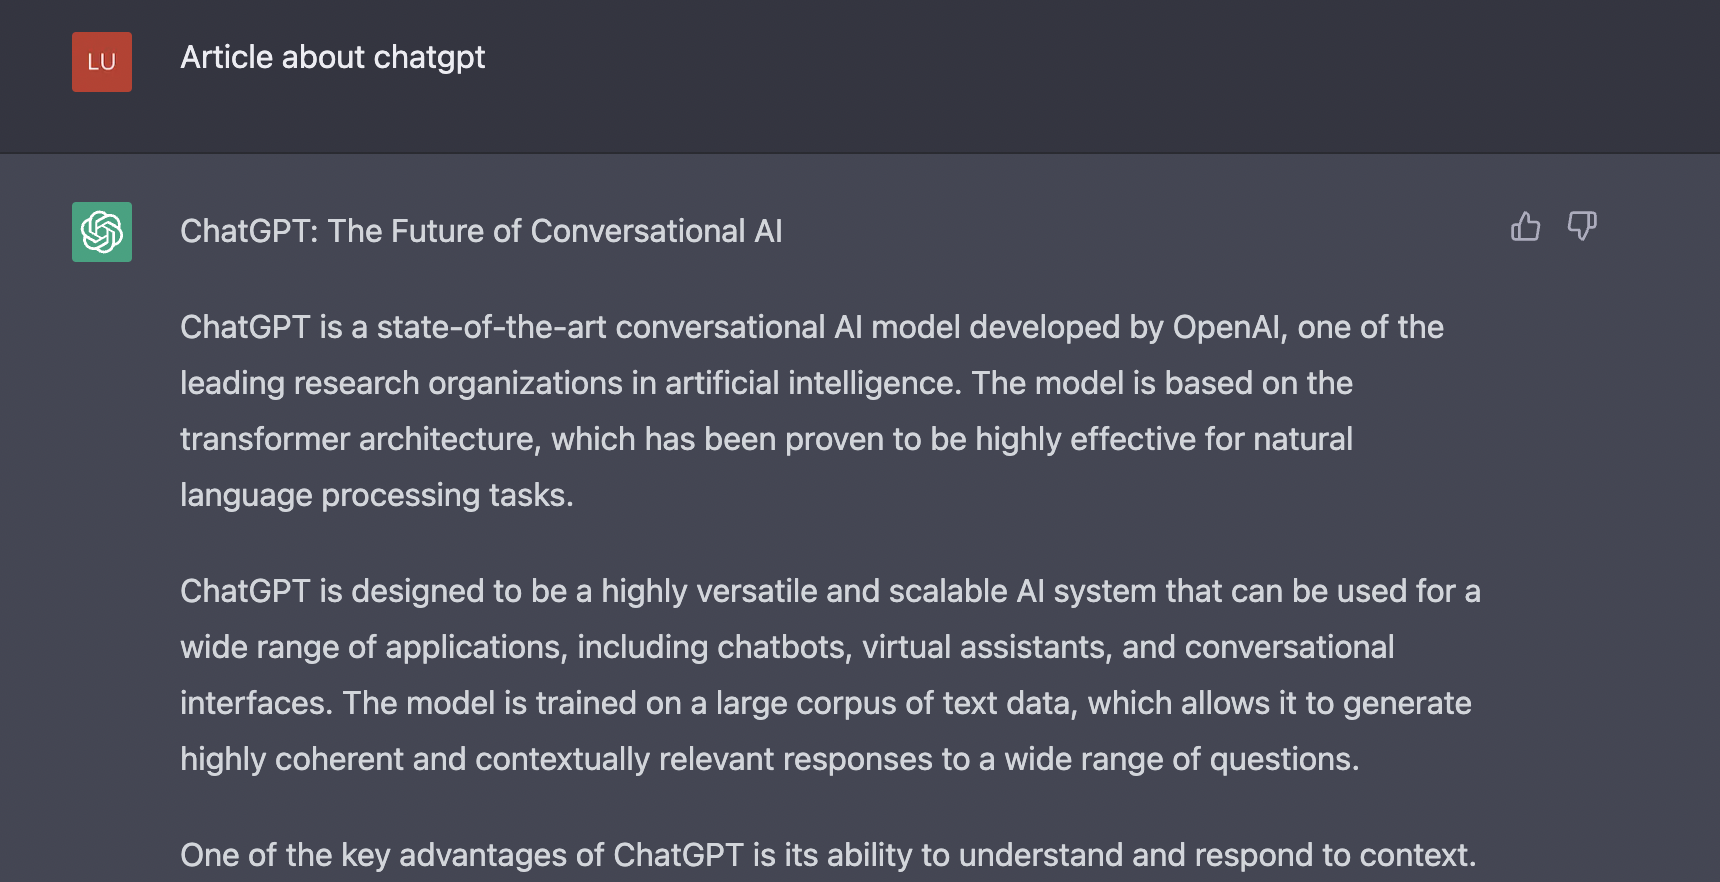 ChatGPT: The Future of Conversational AI